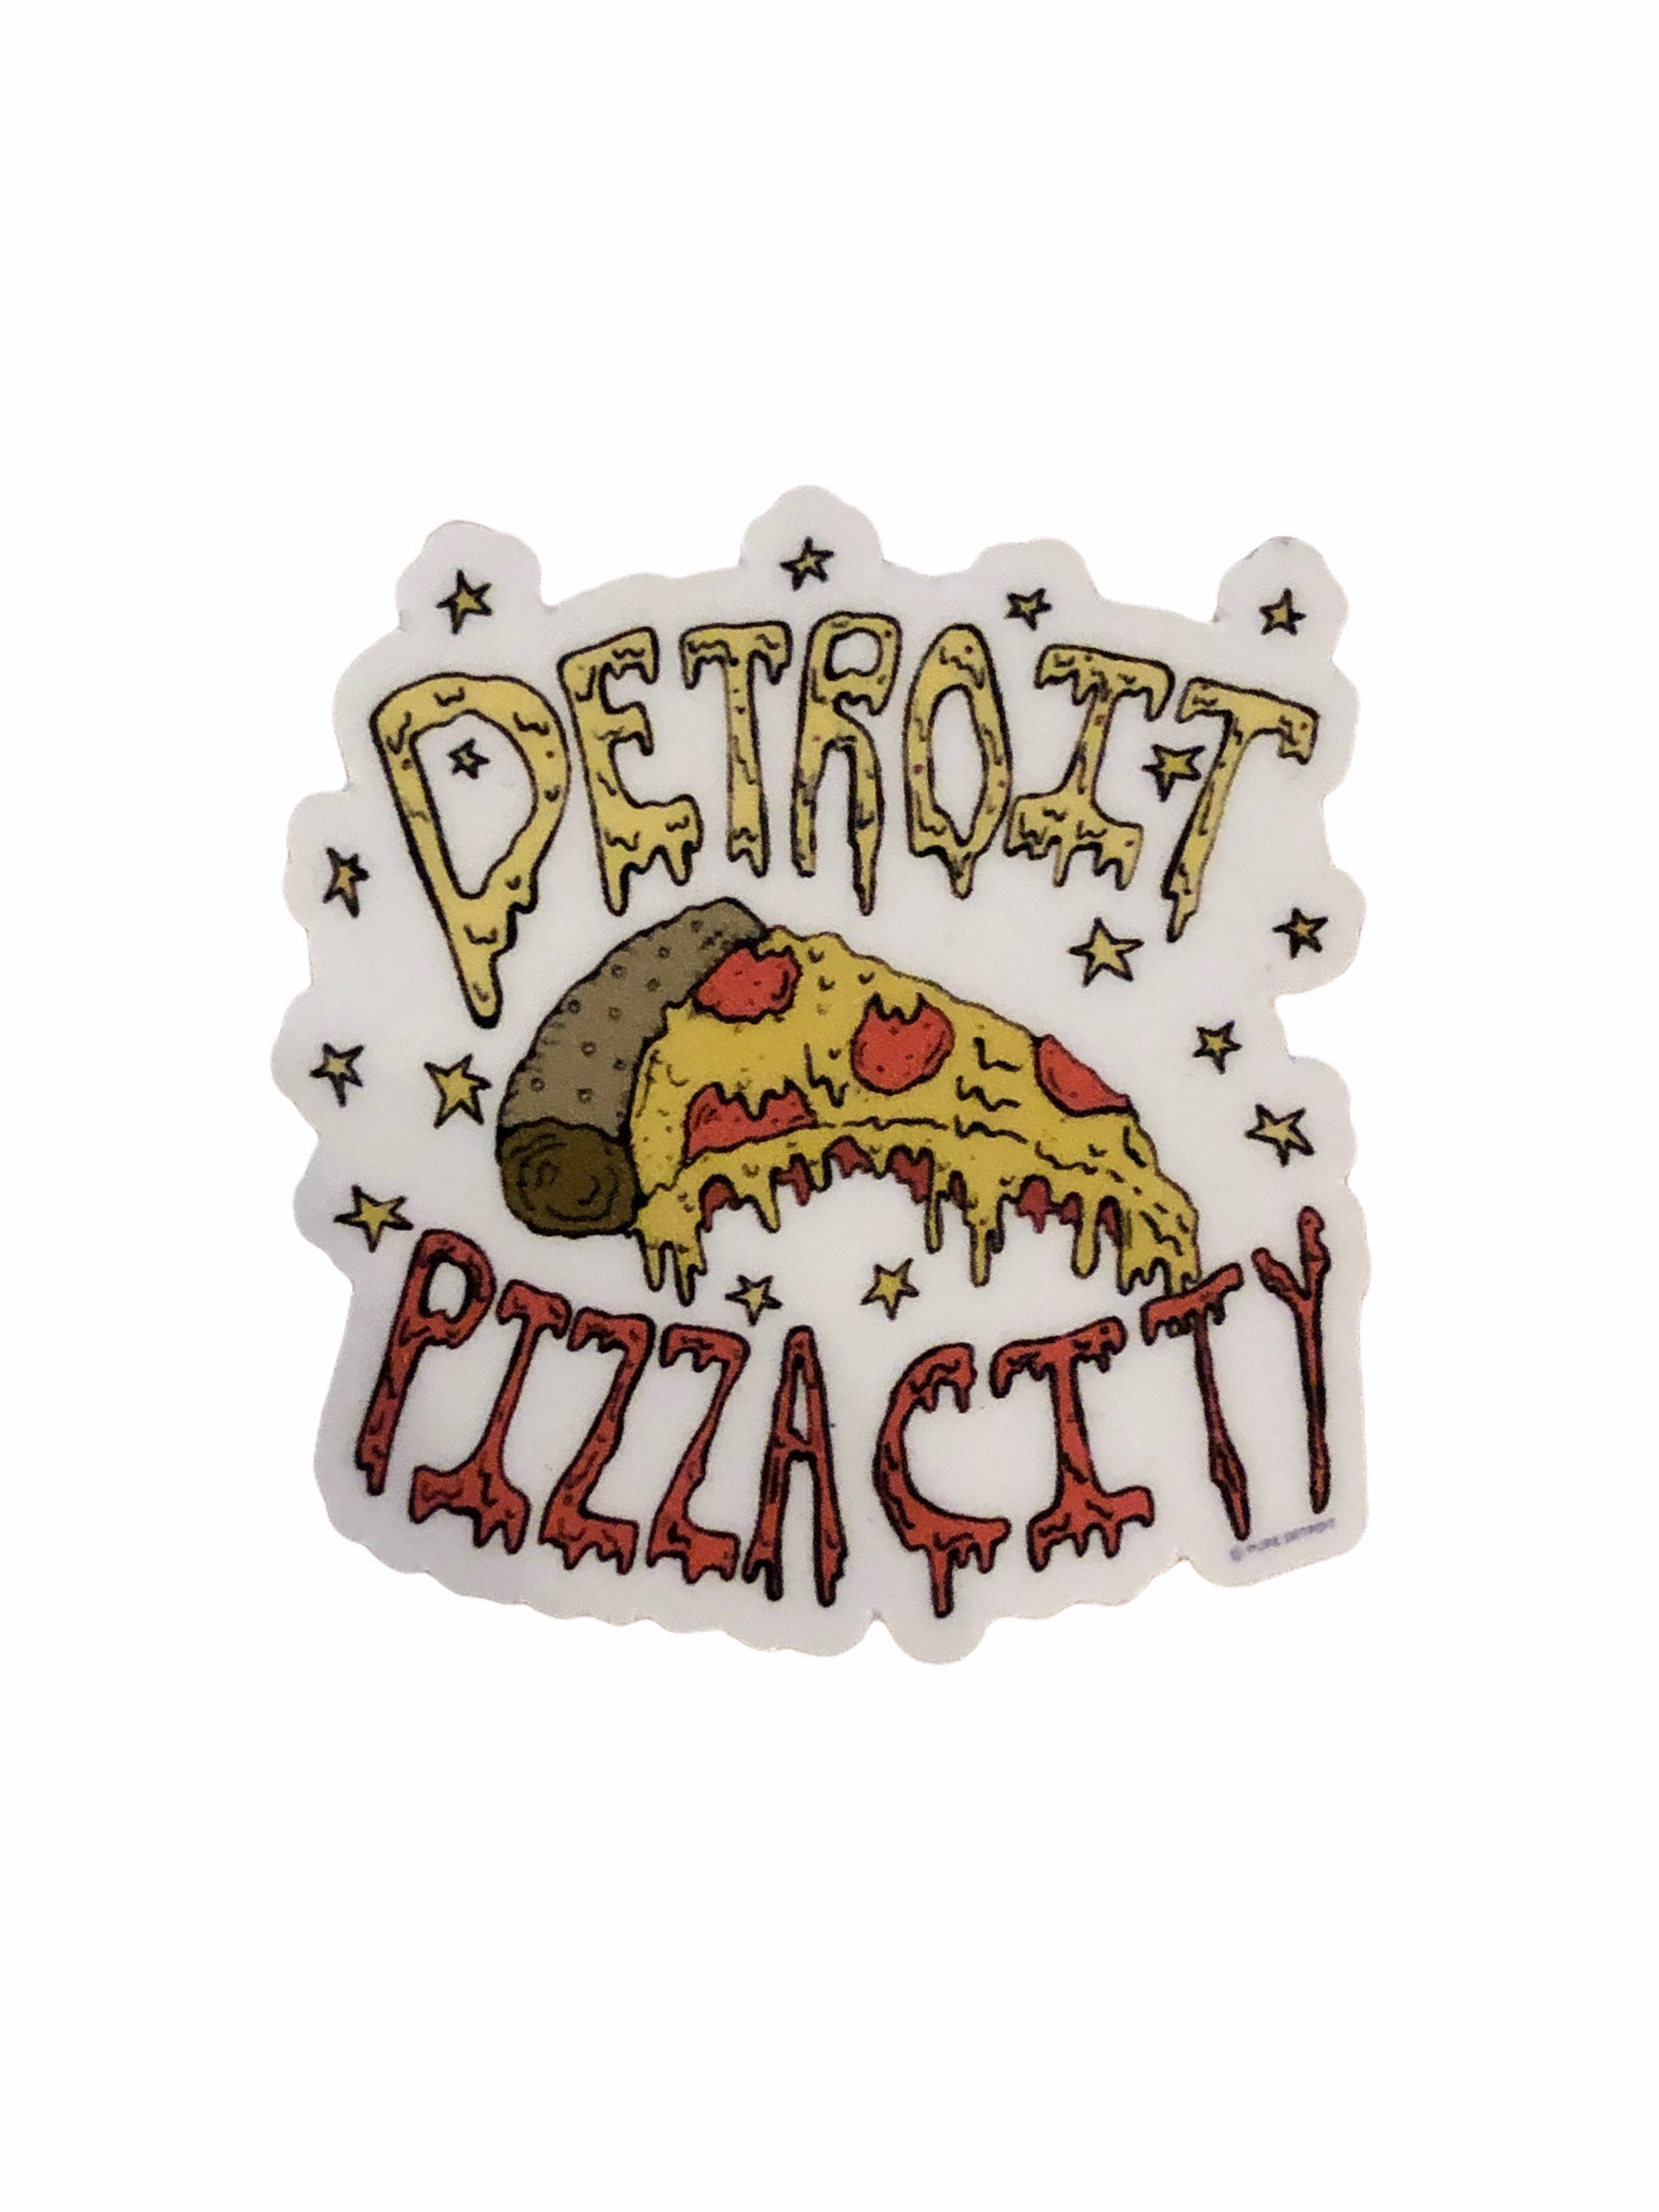 Detroit Pizza City Decal Decal   